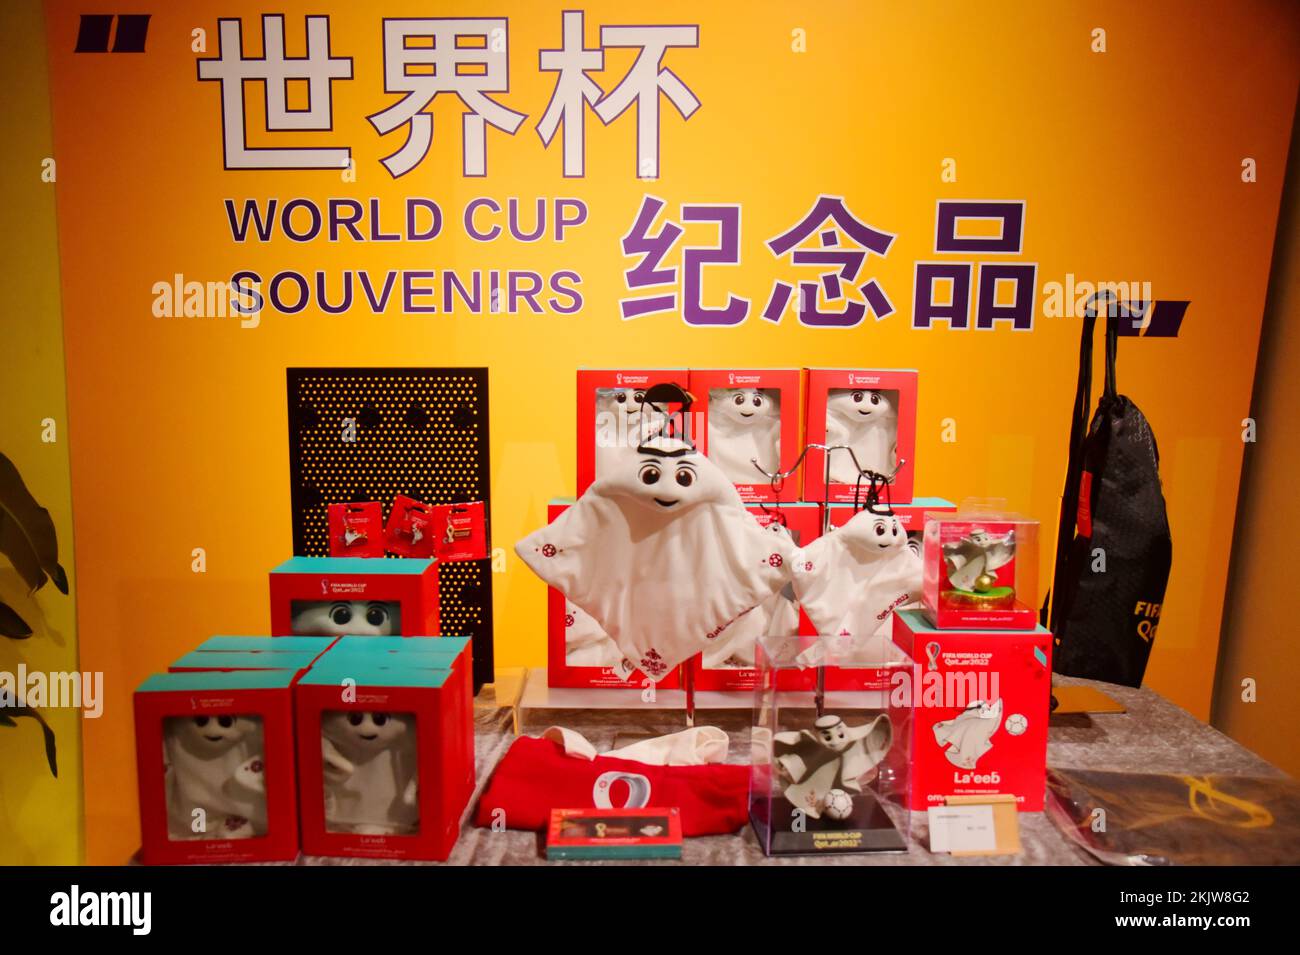 Qatar stages FIFA World Cup™ mascot exhibition at City Center Mall